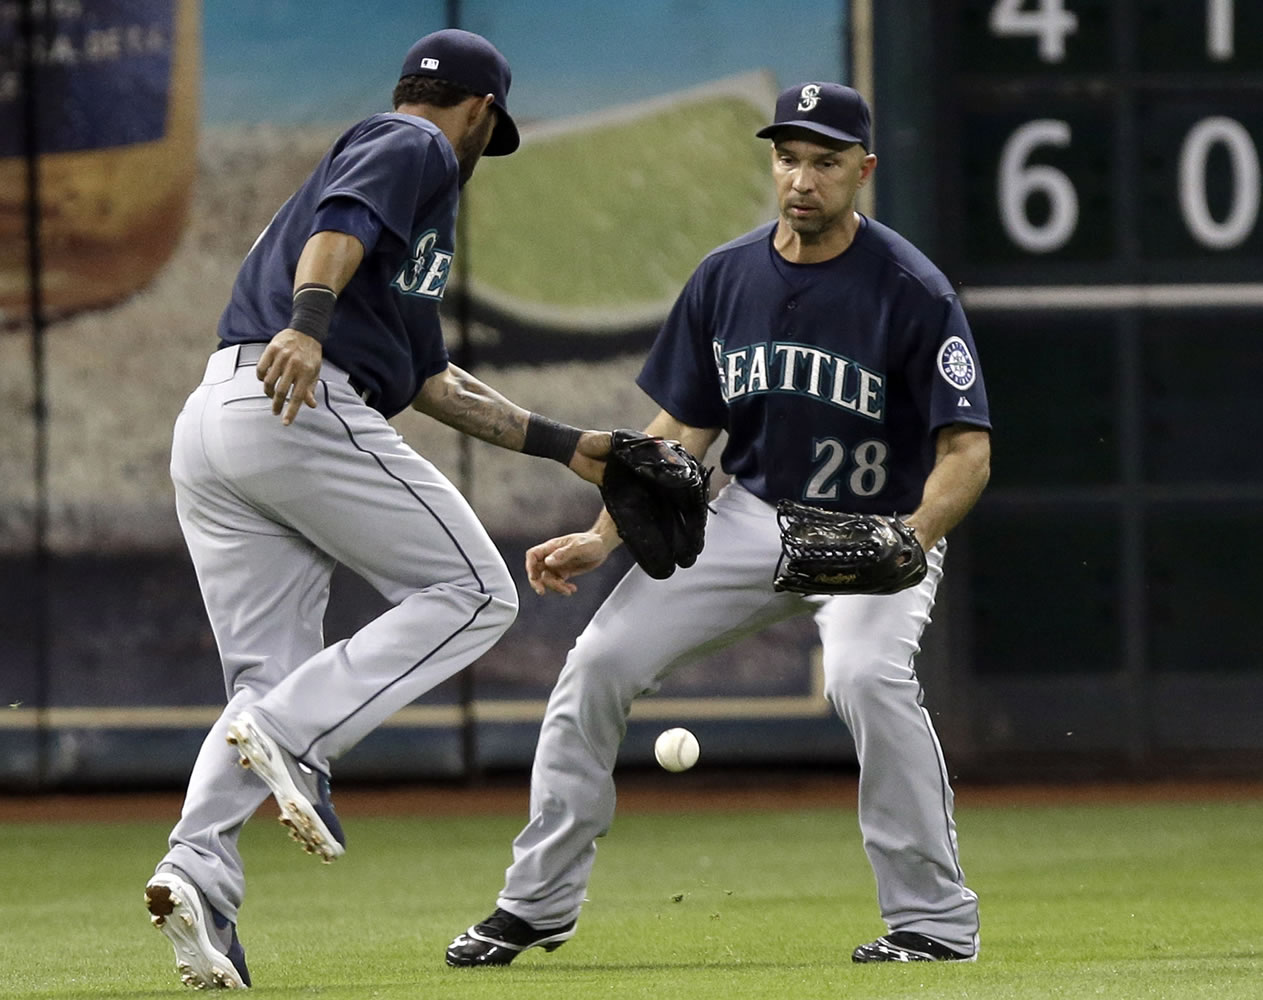 The ball drops between left fielder Raul Ibanez (28) and shortstop Brendan Ryan in a 3-2 loss at Houston.